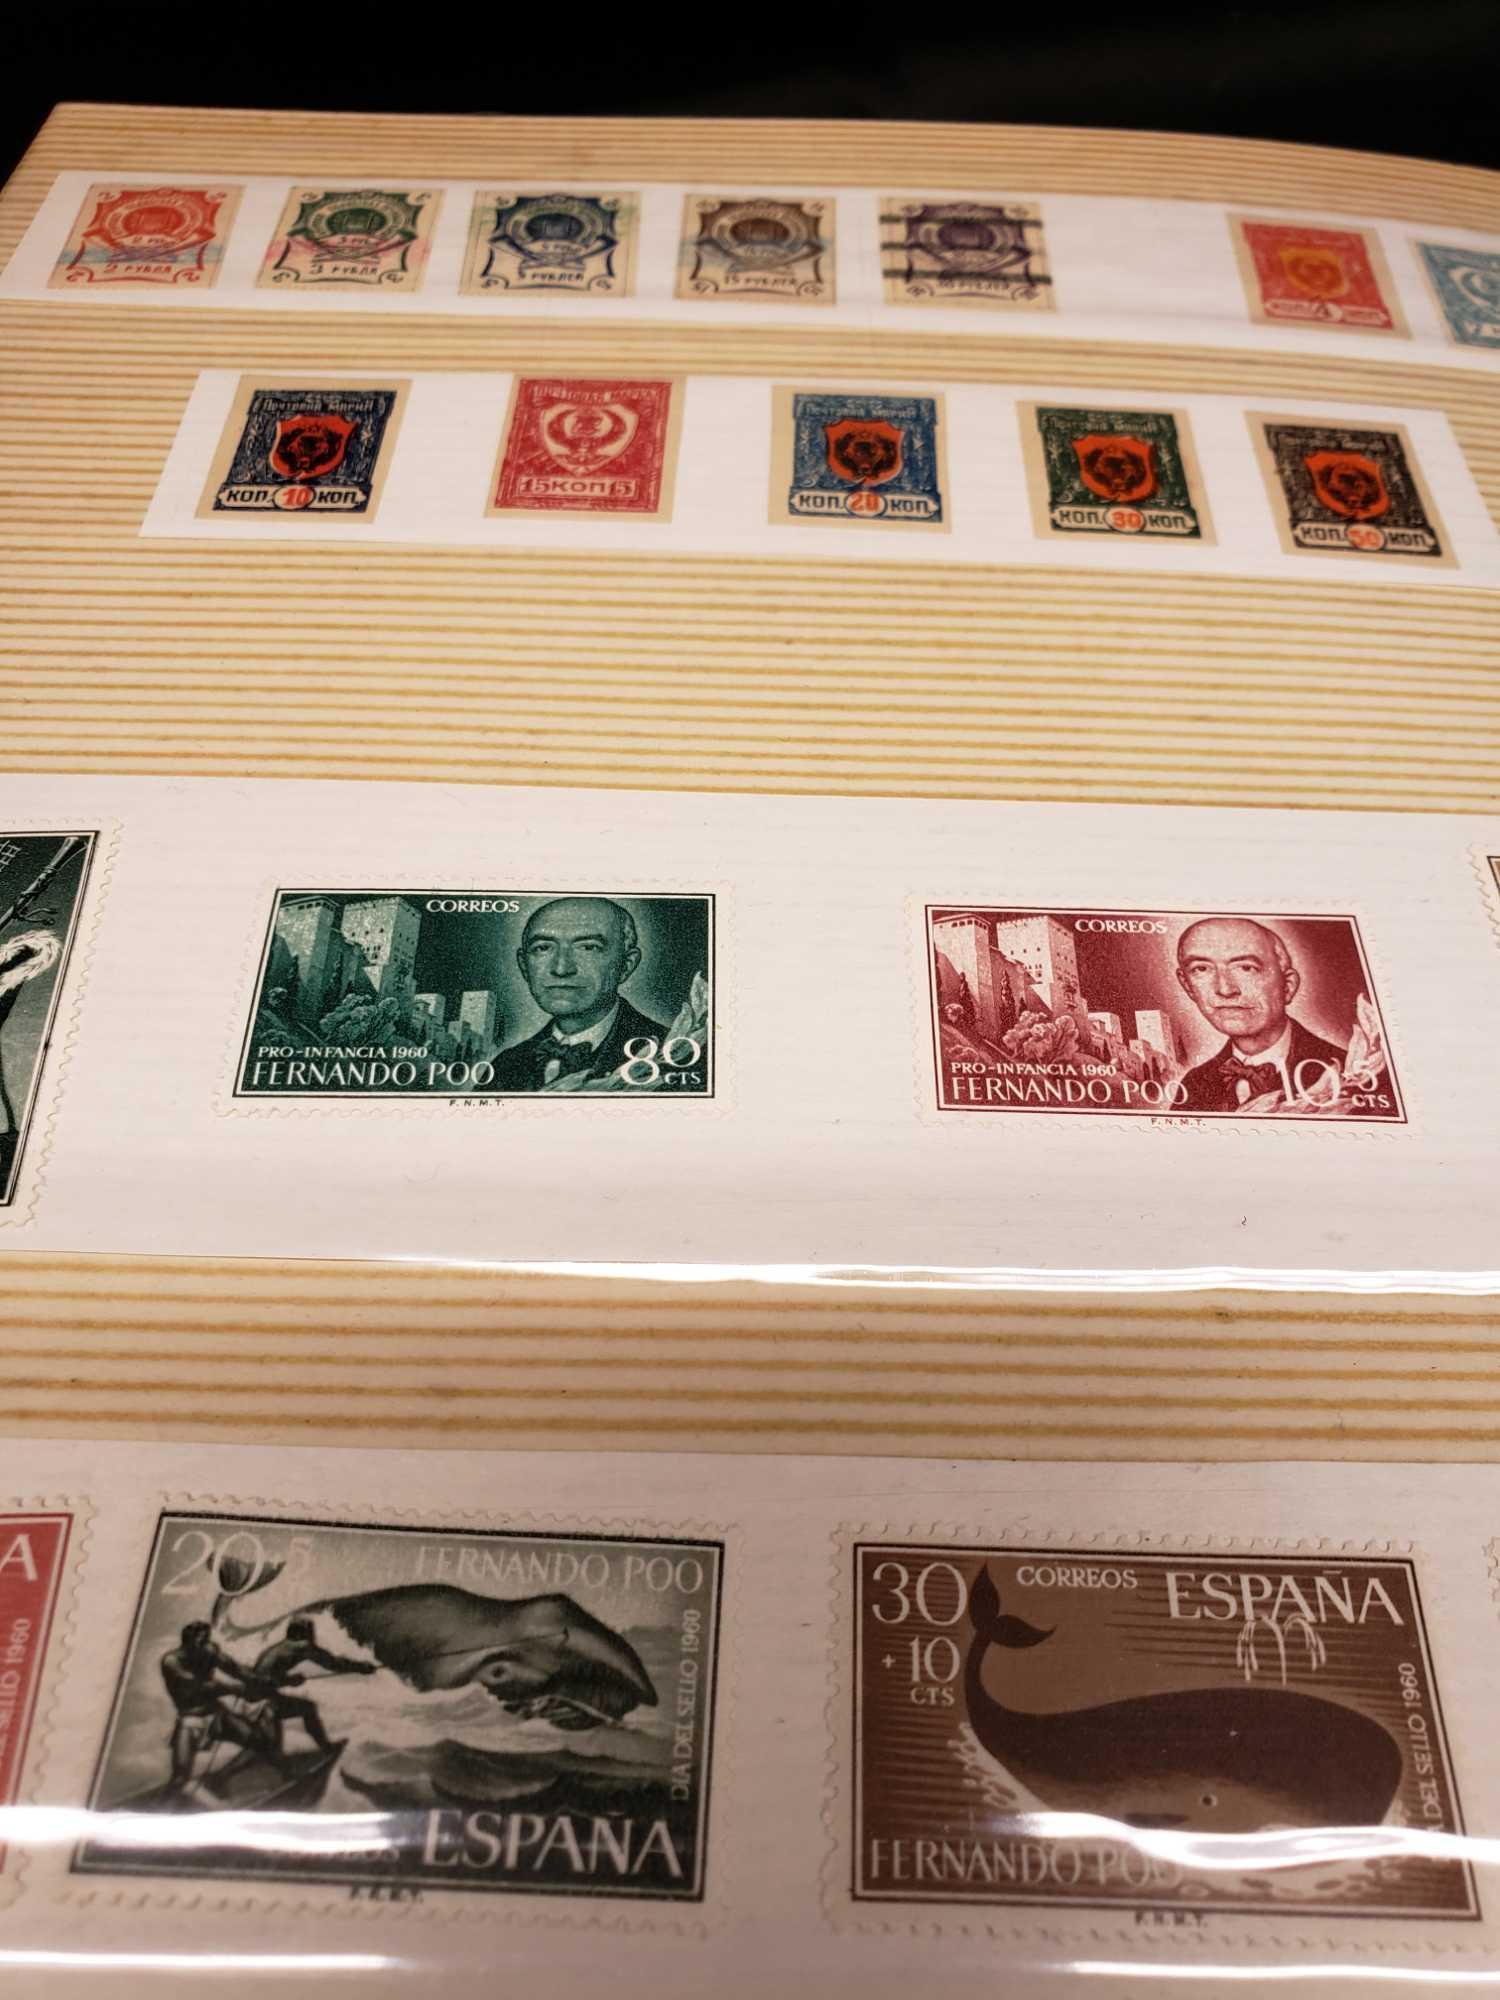 Rare Stamps of Republic Dominicana. Egypte. Ethiopie and more